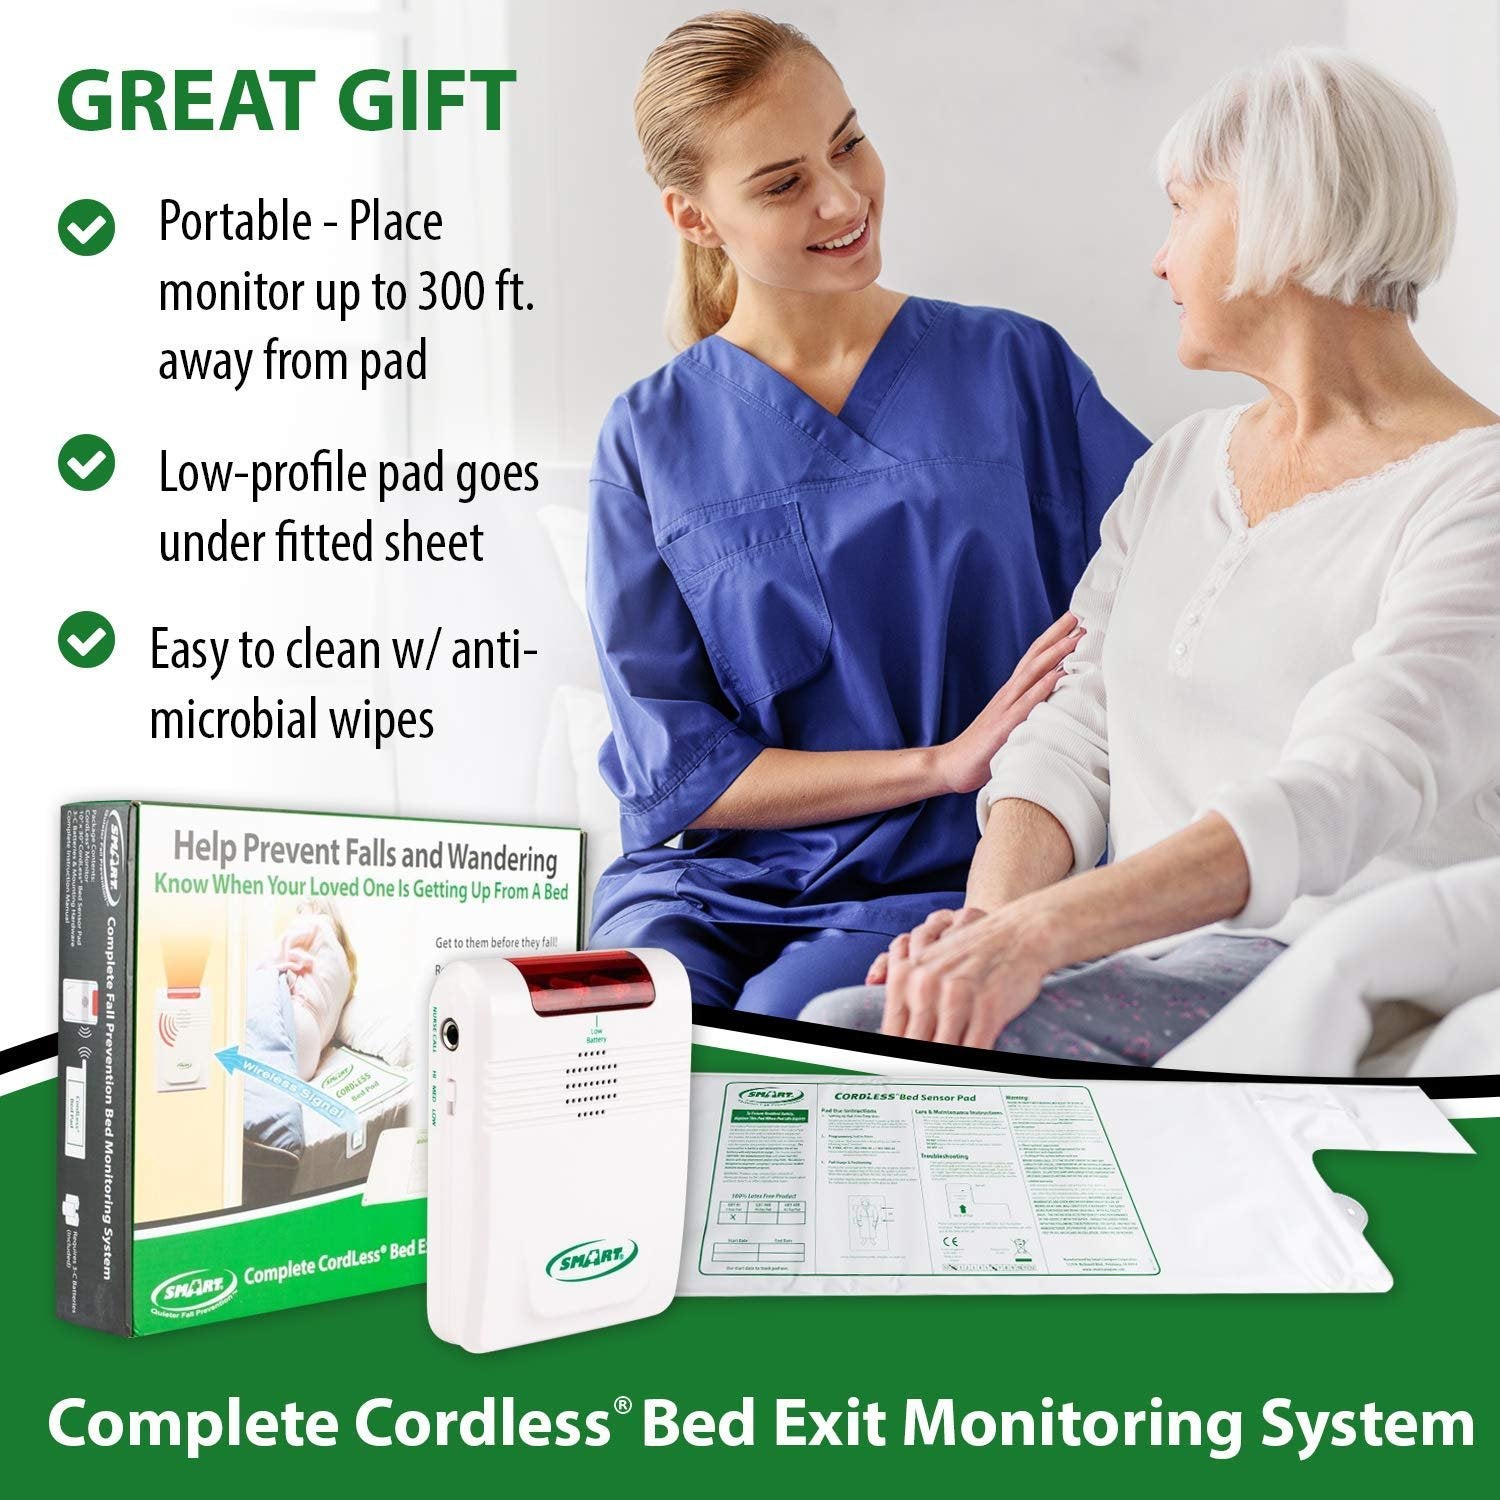 Smart Caregiver Corporation Cordless Bed Exit Monitoring System Alarm with Bed Pressure Sensing Pad - Help Prevent Falls and Wandering While Unattended